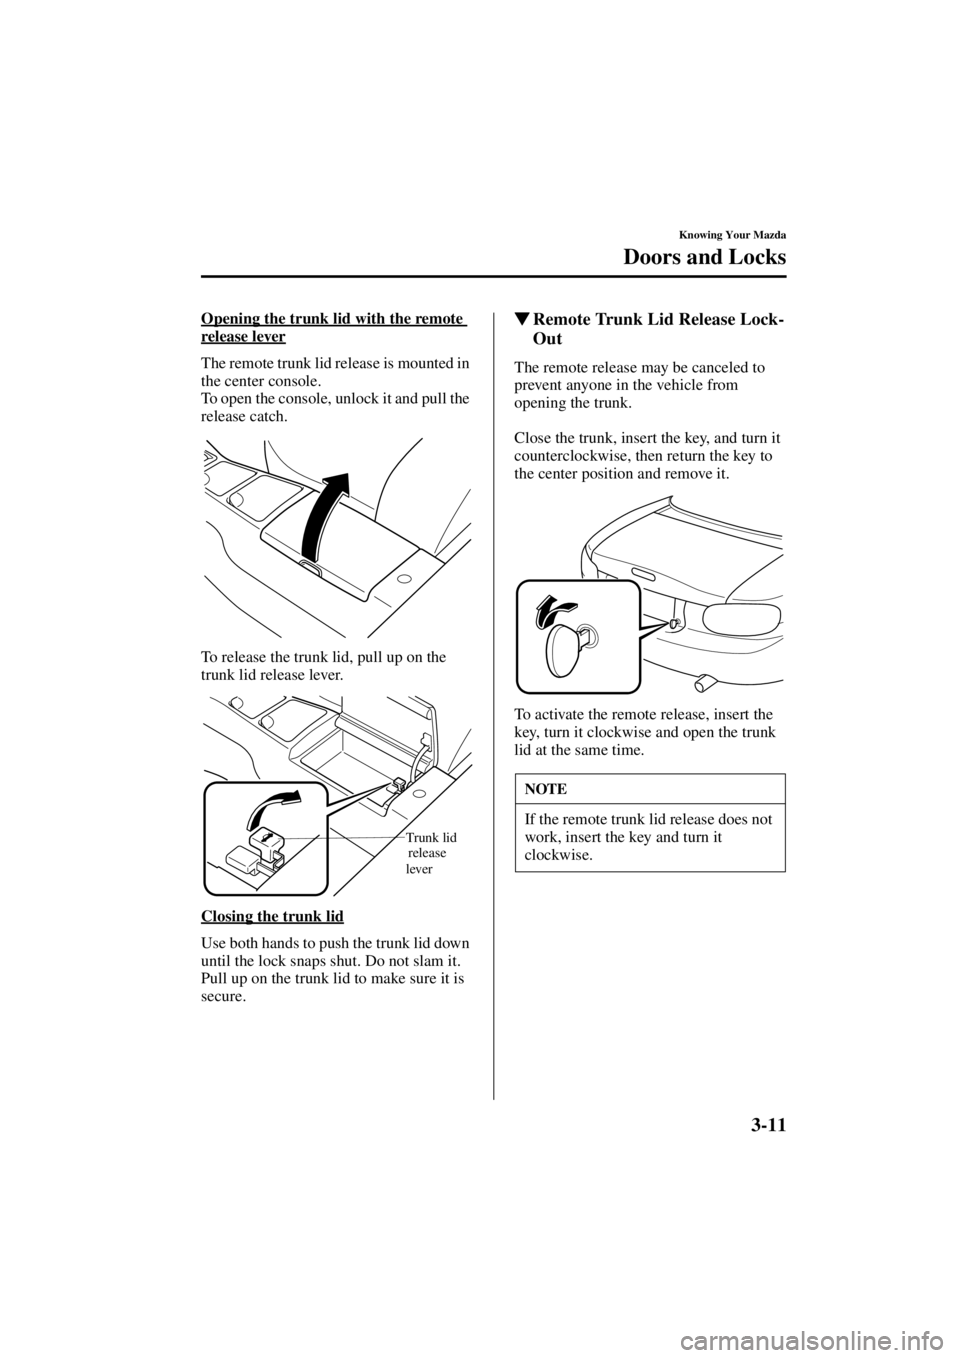 MAZDA MODEL SPEED MX-5 MIATA 2004 Service Manual 3-11
Knowing Your Mazda
Doors and Locks
Form No. 8T02-EA-03L
Opening the trunk lid with the remote 
release lever
The remote trunk lid release is mounted in 
the center console.
To open the console, u